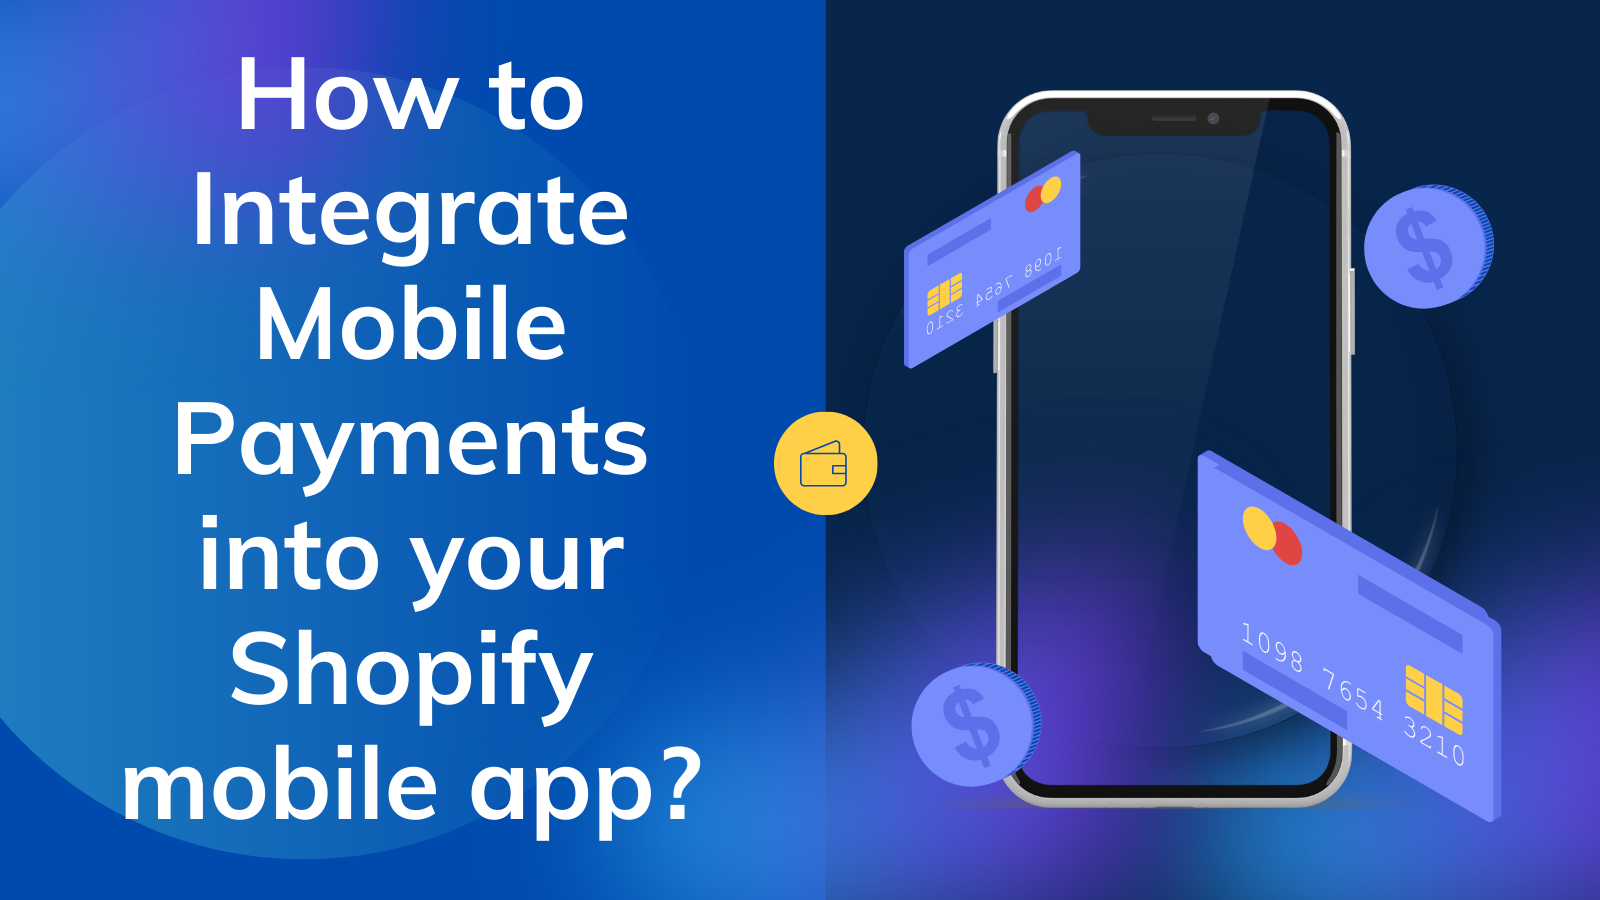 How to integrate mobile payments into your Shopify mobile app?